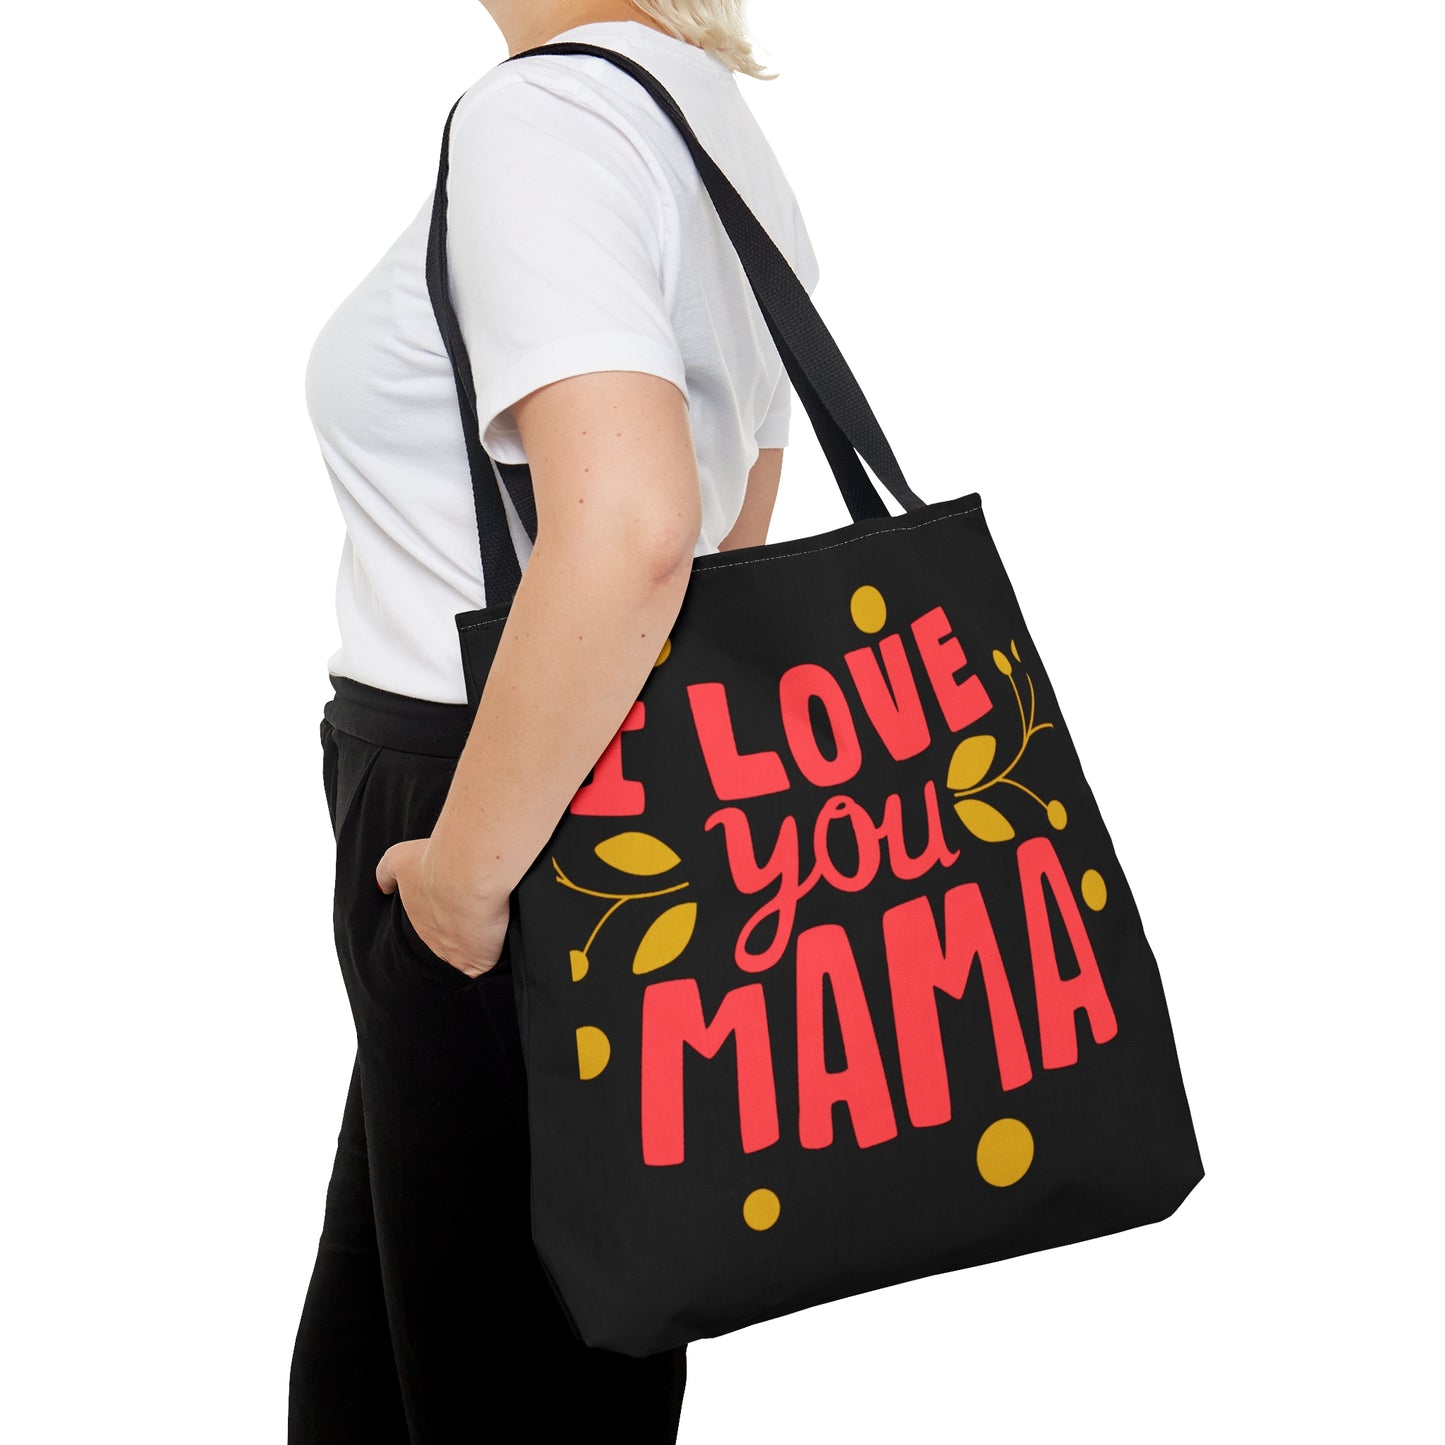 Let your Mama know you love her, don’t be shy. Make her day with this tote bag. Come in 3 sizes to meet her needs.